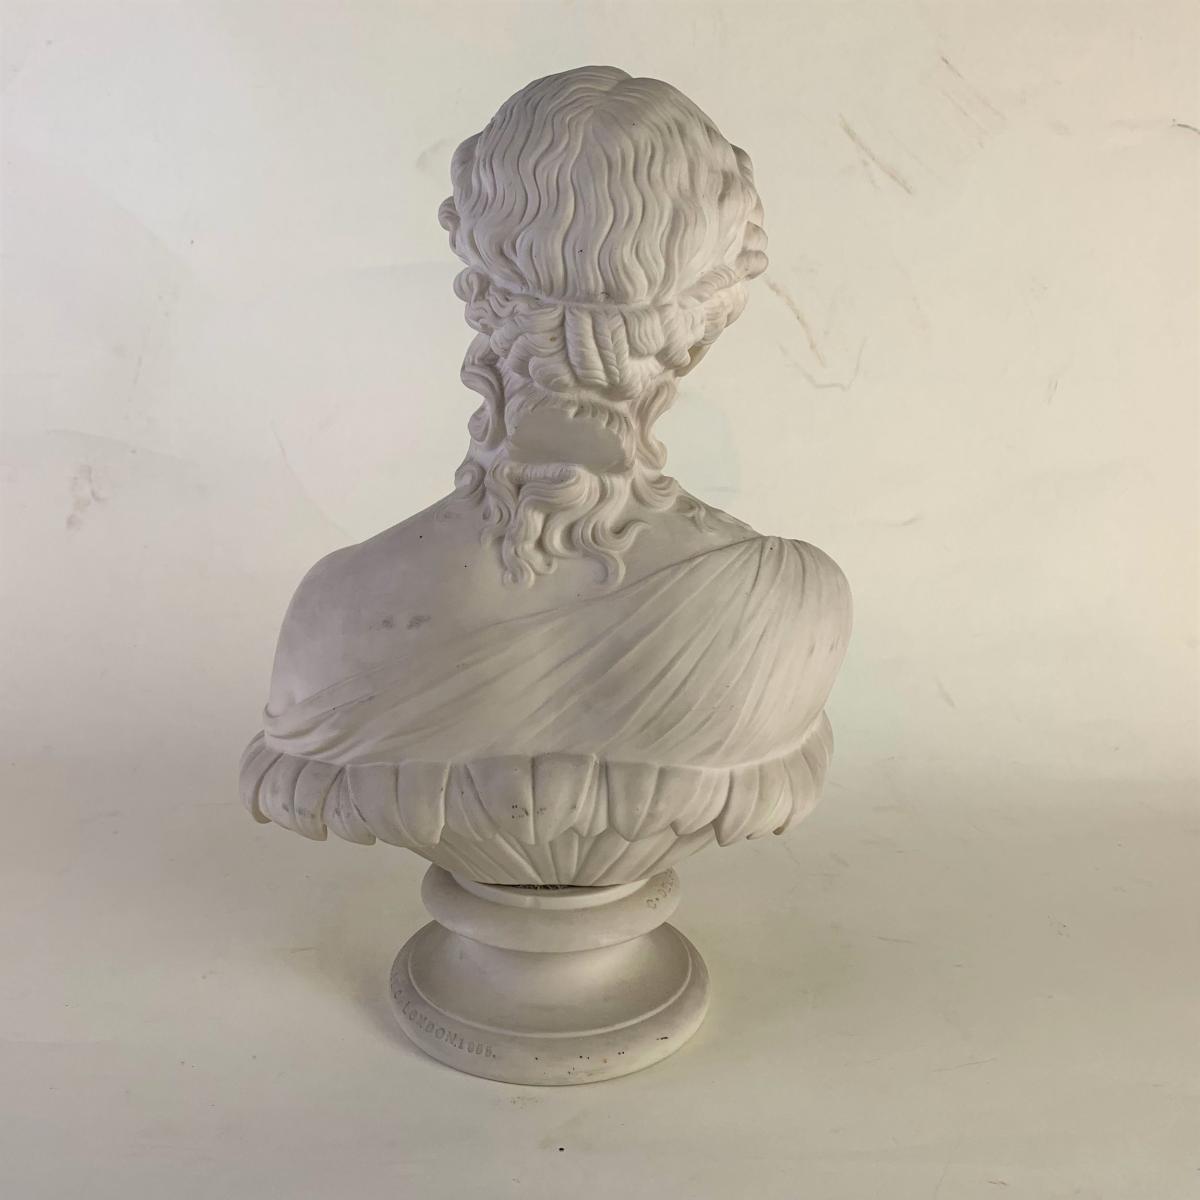 Parian Ware Bust Titled Clytie, Sculpted by C. Delpech